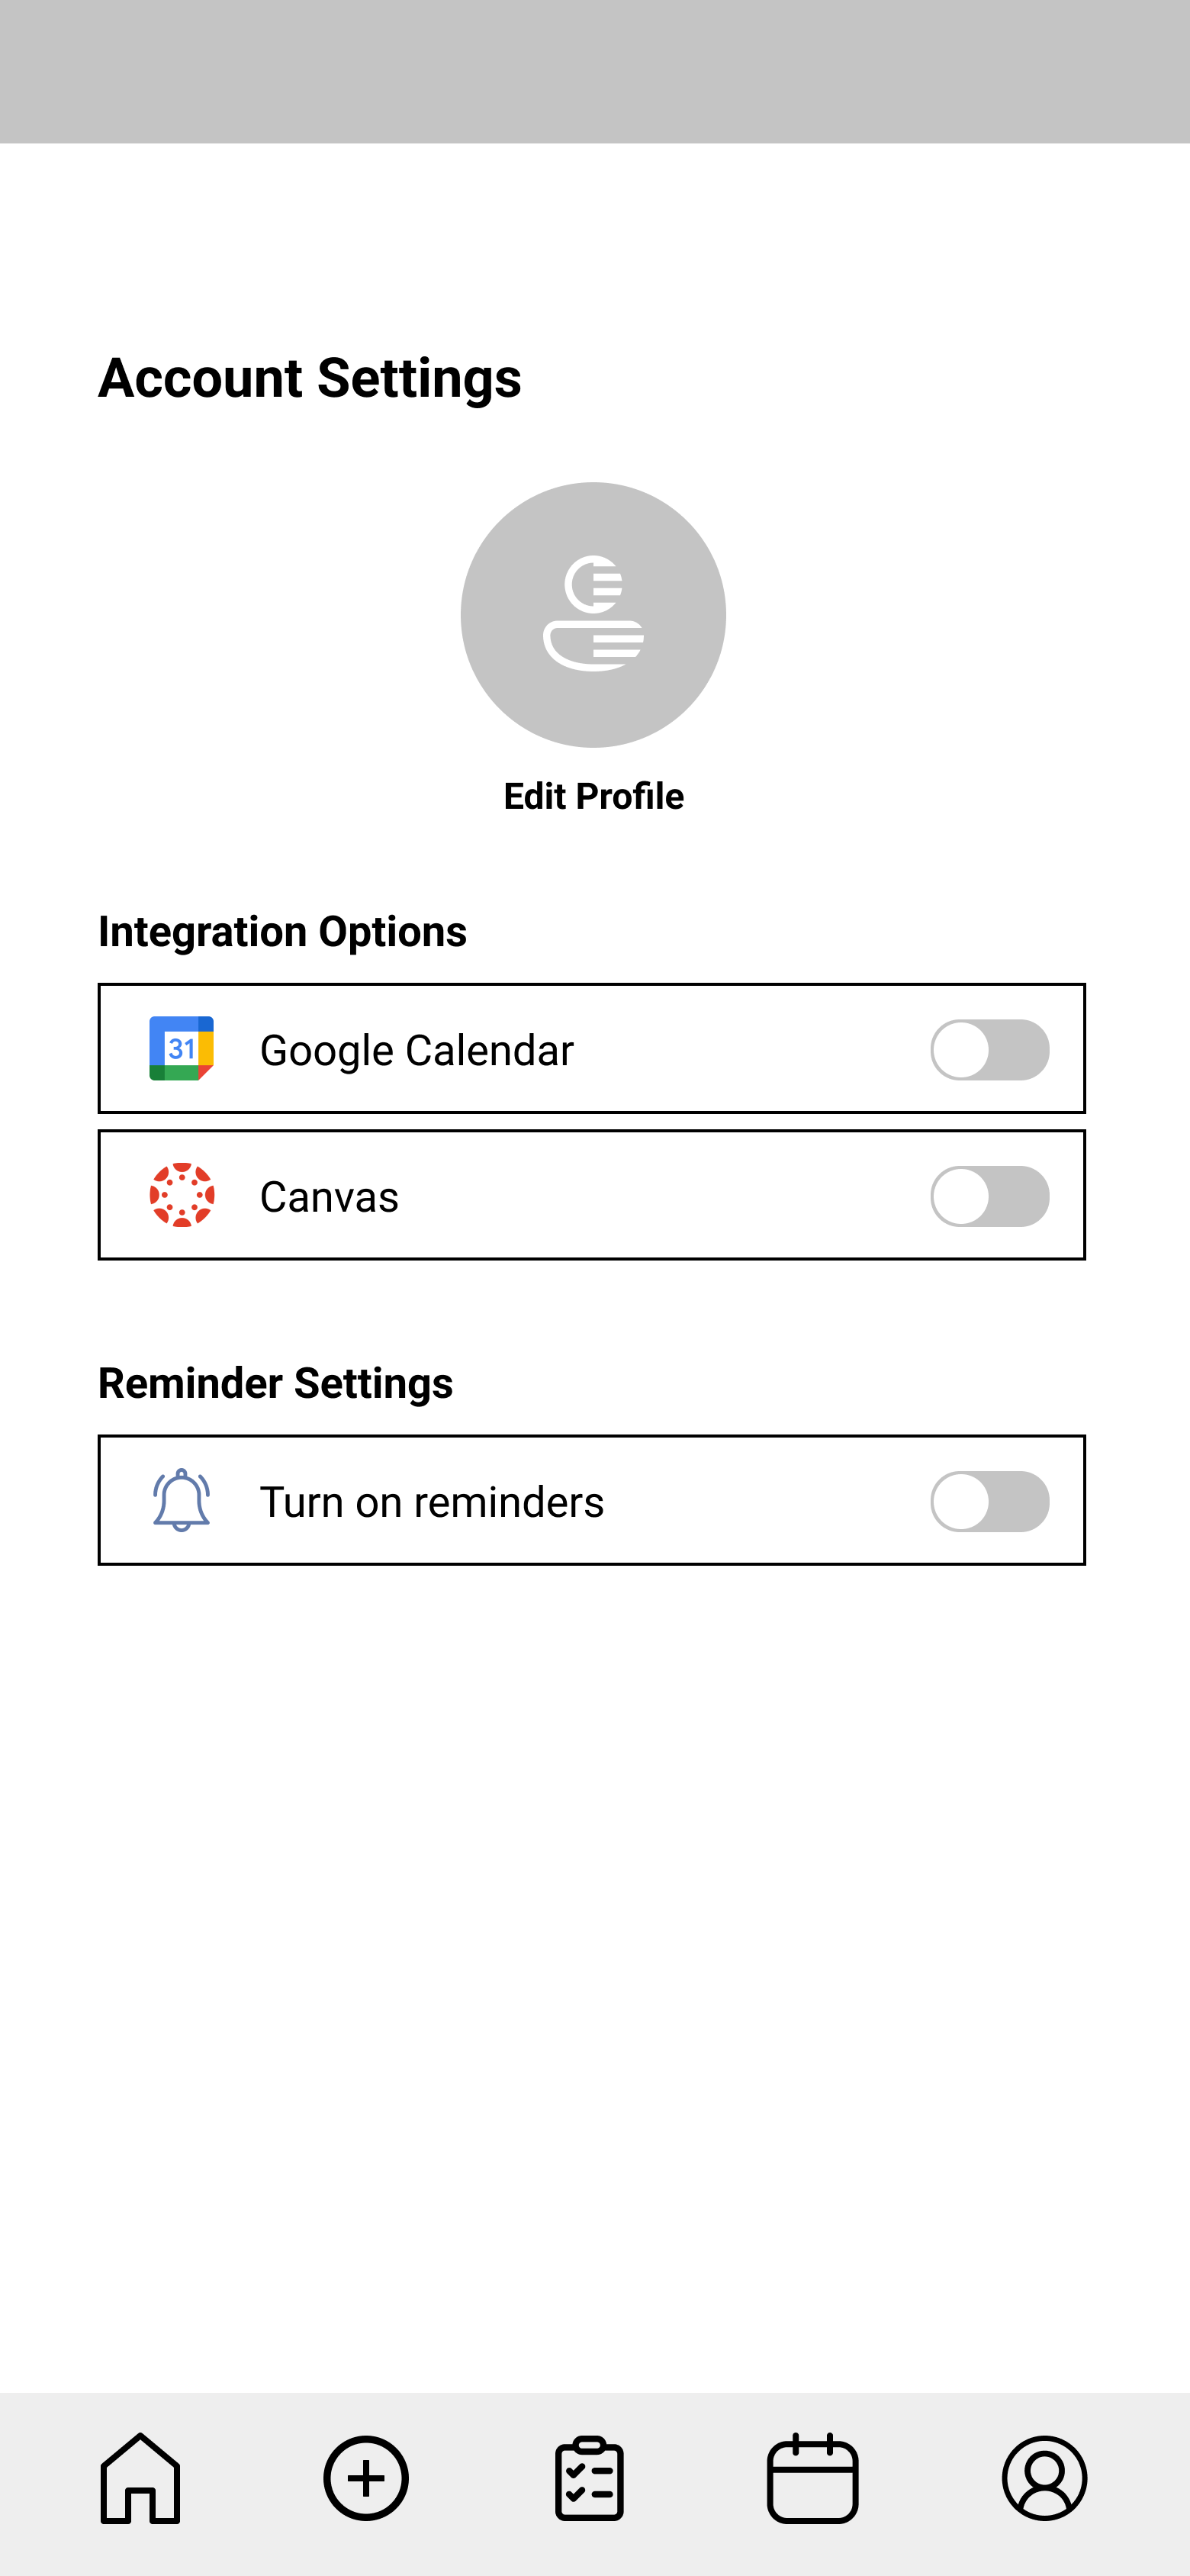 Dayly settings page wireframe